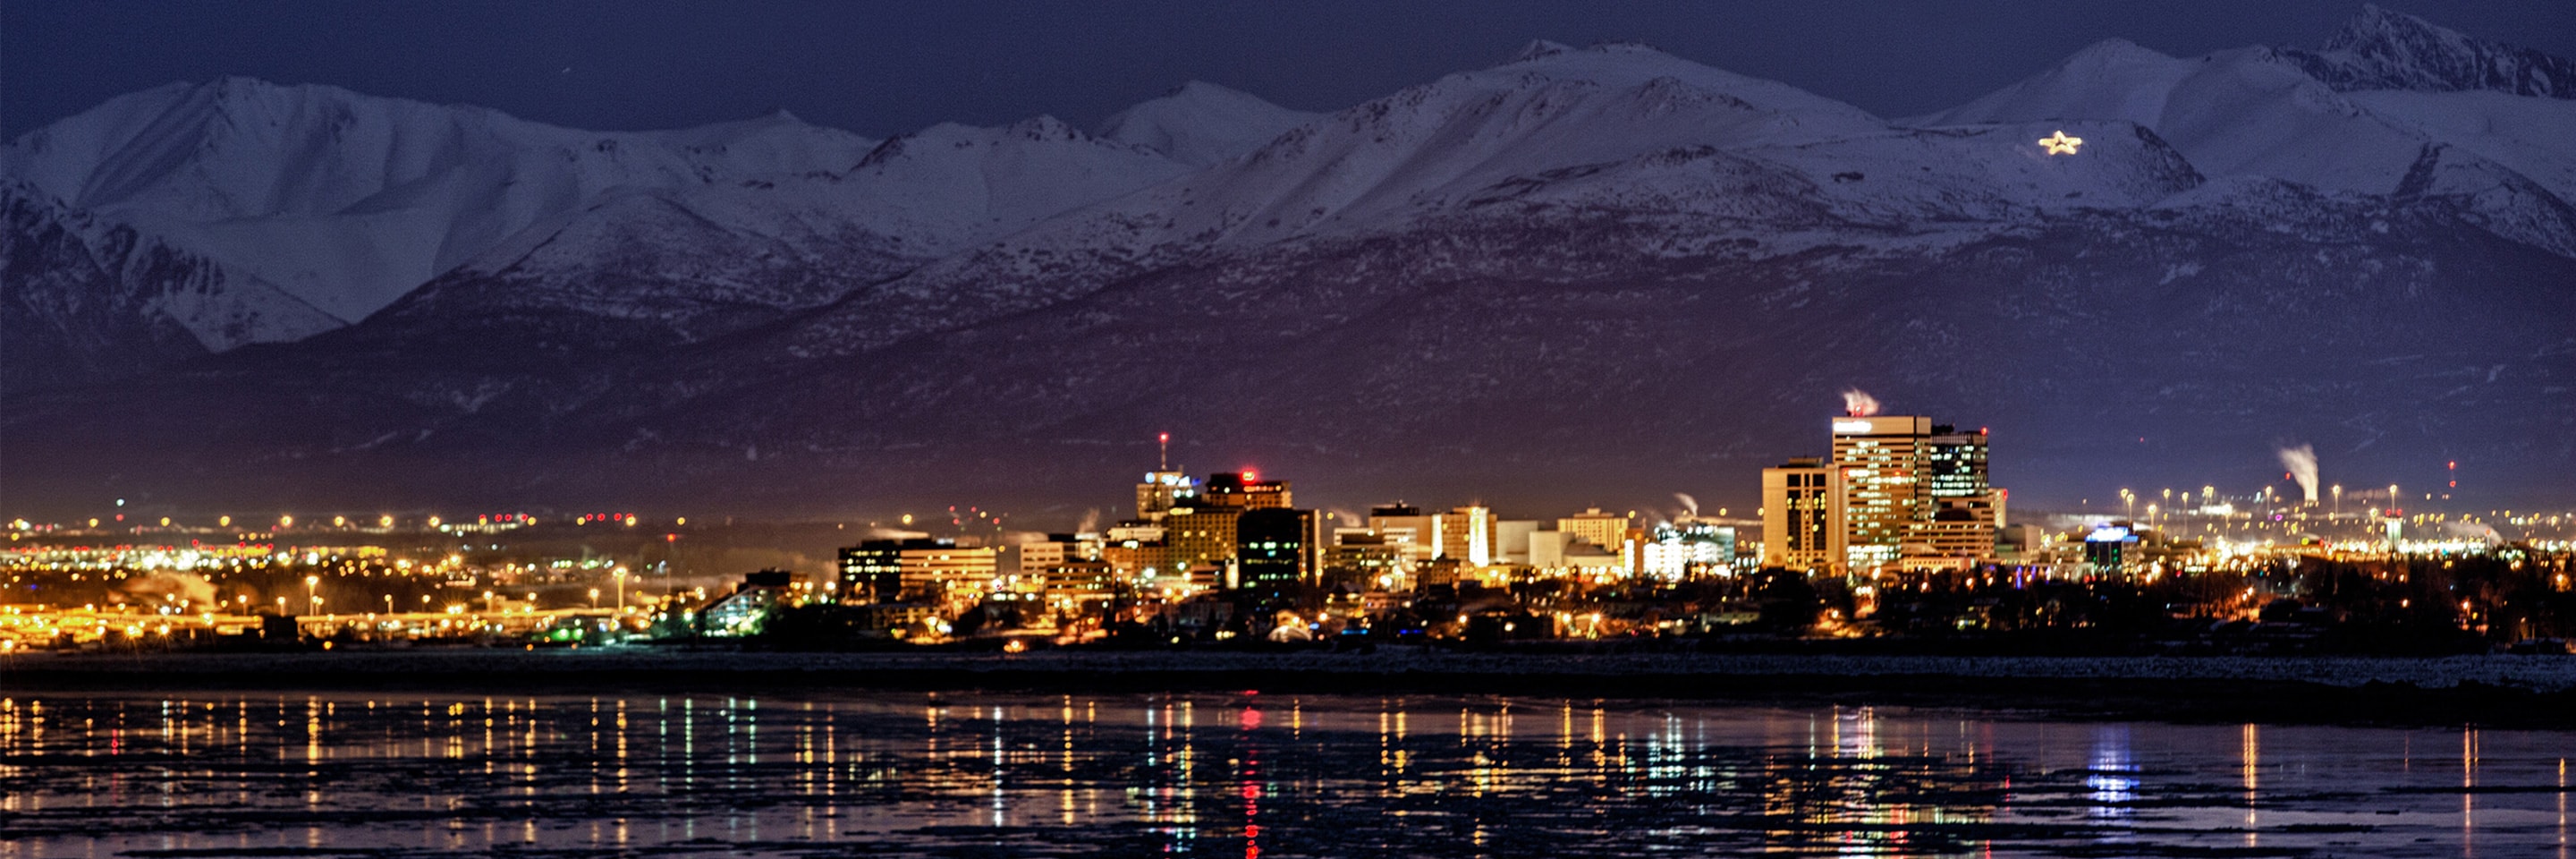 Hotels in Anchorage